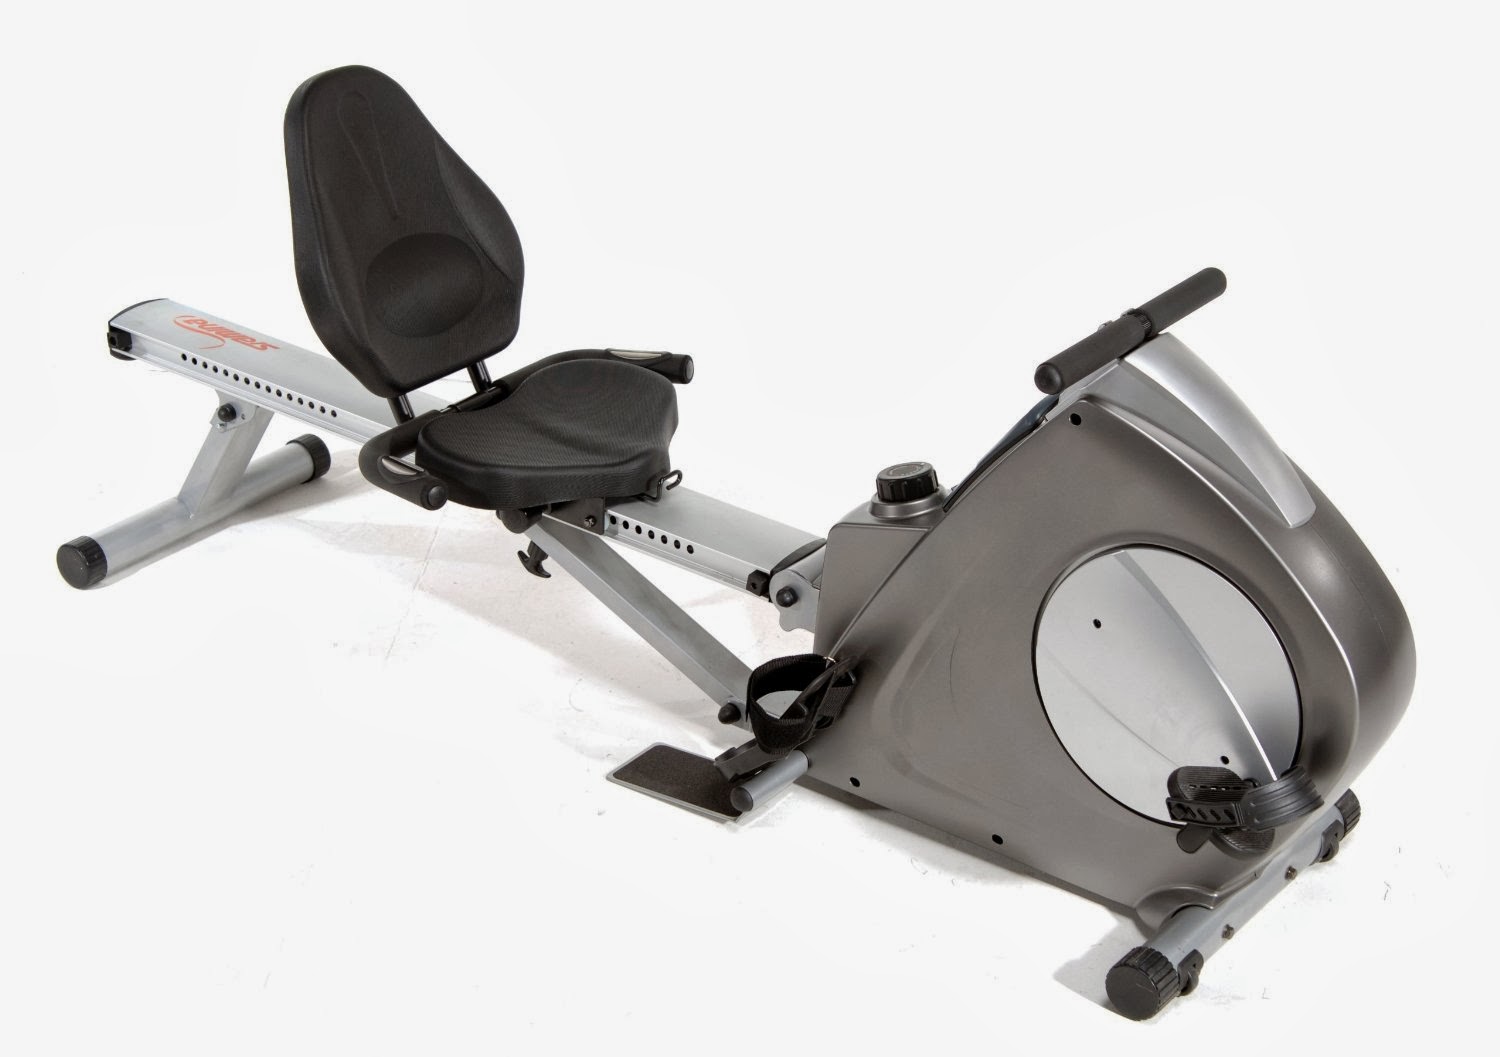 Stamina 15-9003 Deluxe Conversion II Recumbent Bike & Rowing Machine in 1, review of features,